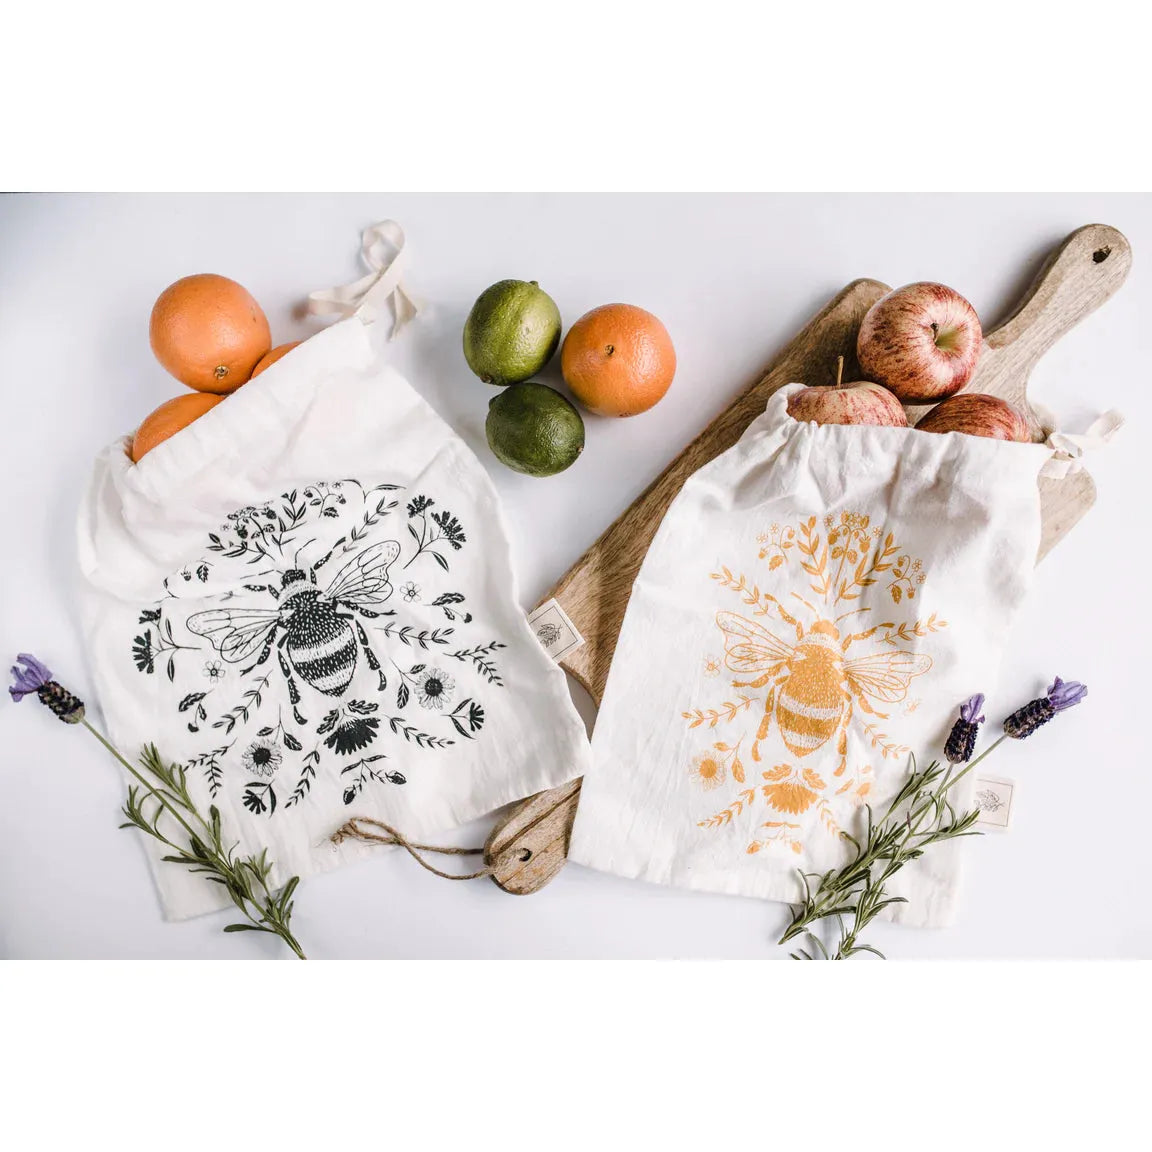 Bee Reusable Produce Bags, Set of 2